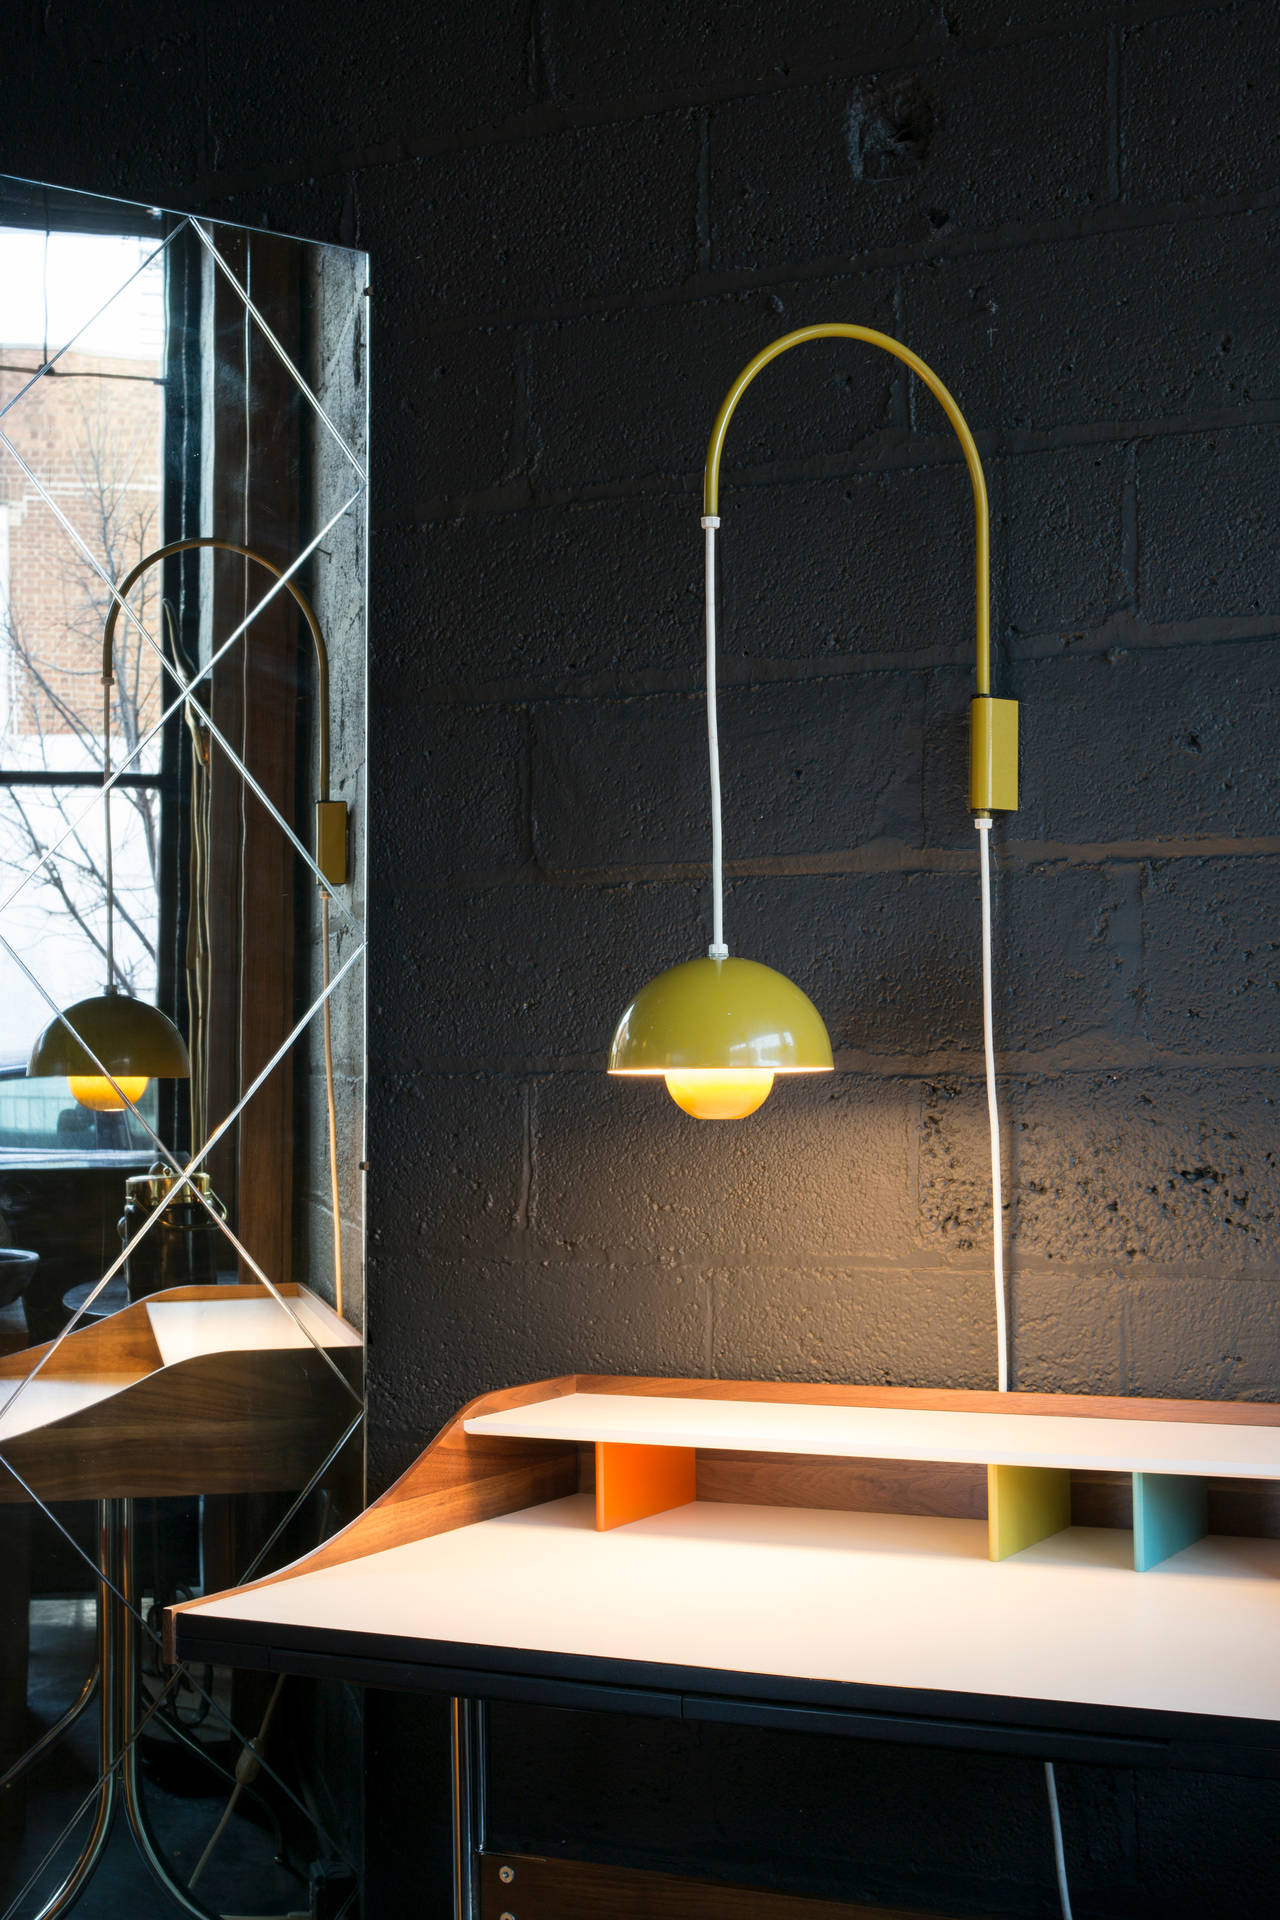 White cord can be extended or retracted to raise or lower light. U-shaped arm swings left and right. Original yellow finish. Creates a soft, diffused, pleasant light.